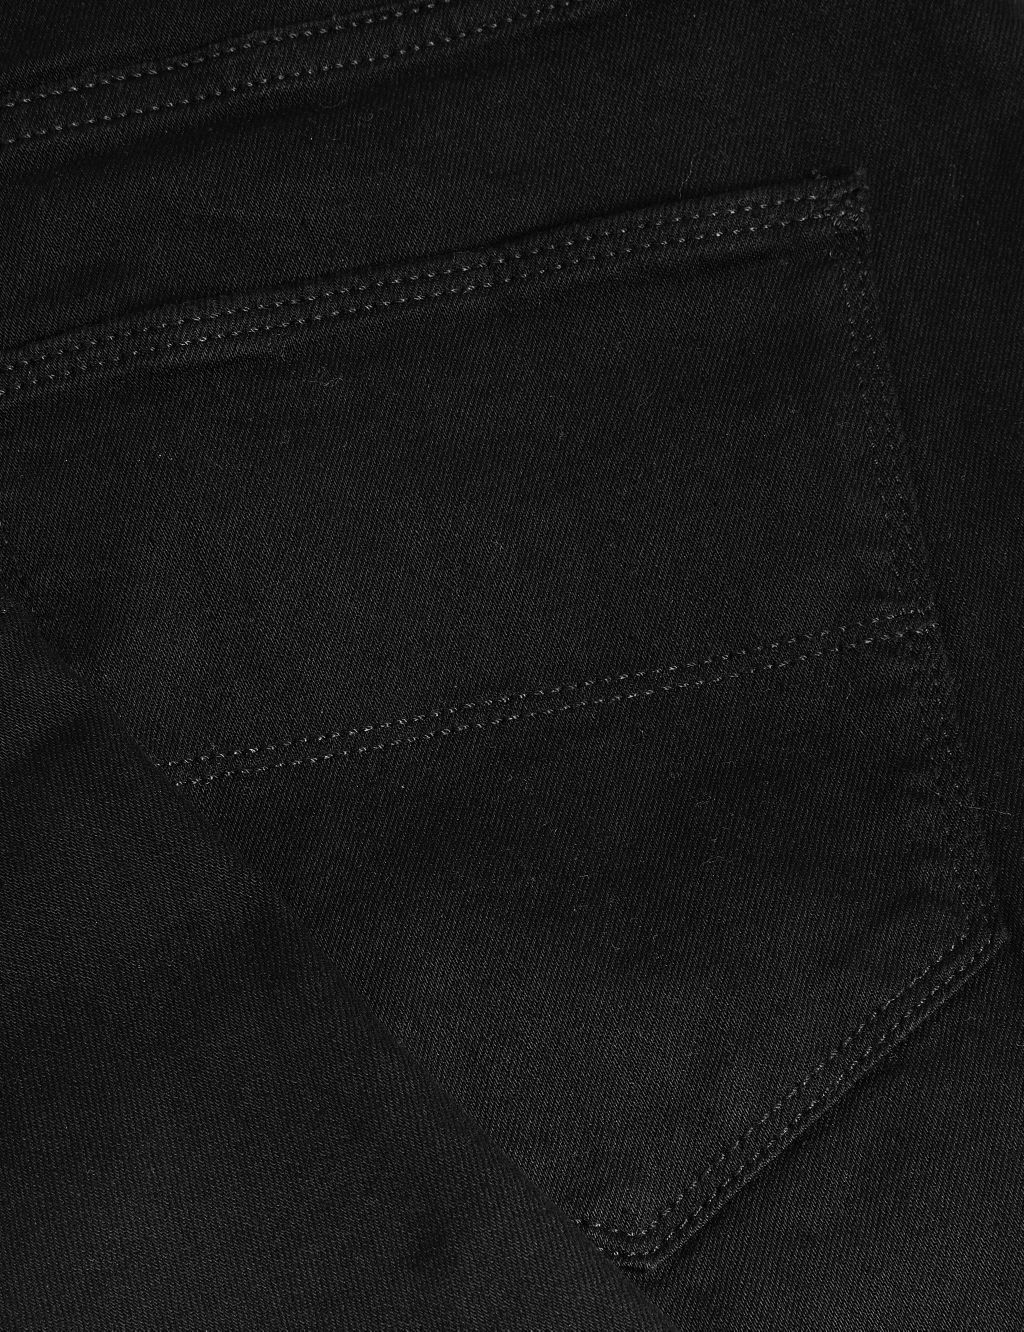 Straight Fit Stretch Jeans image 6